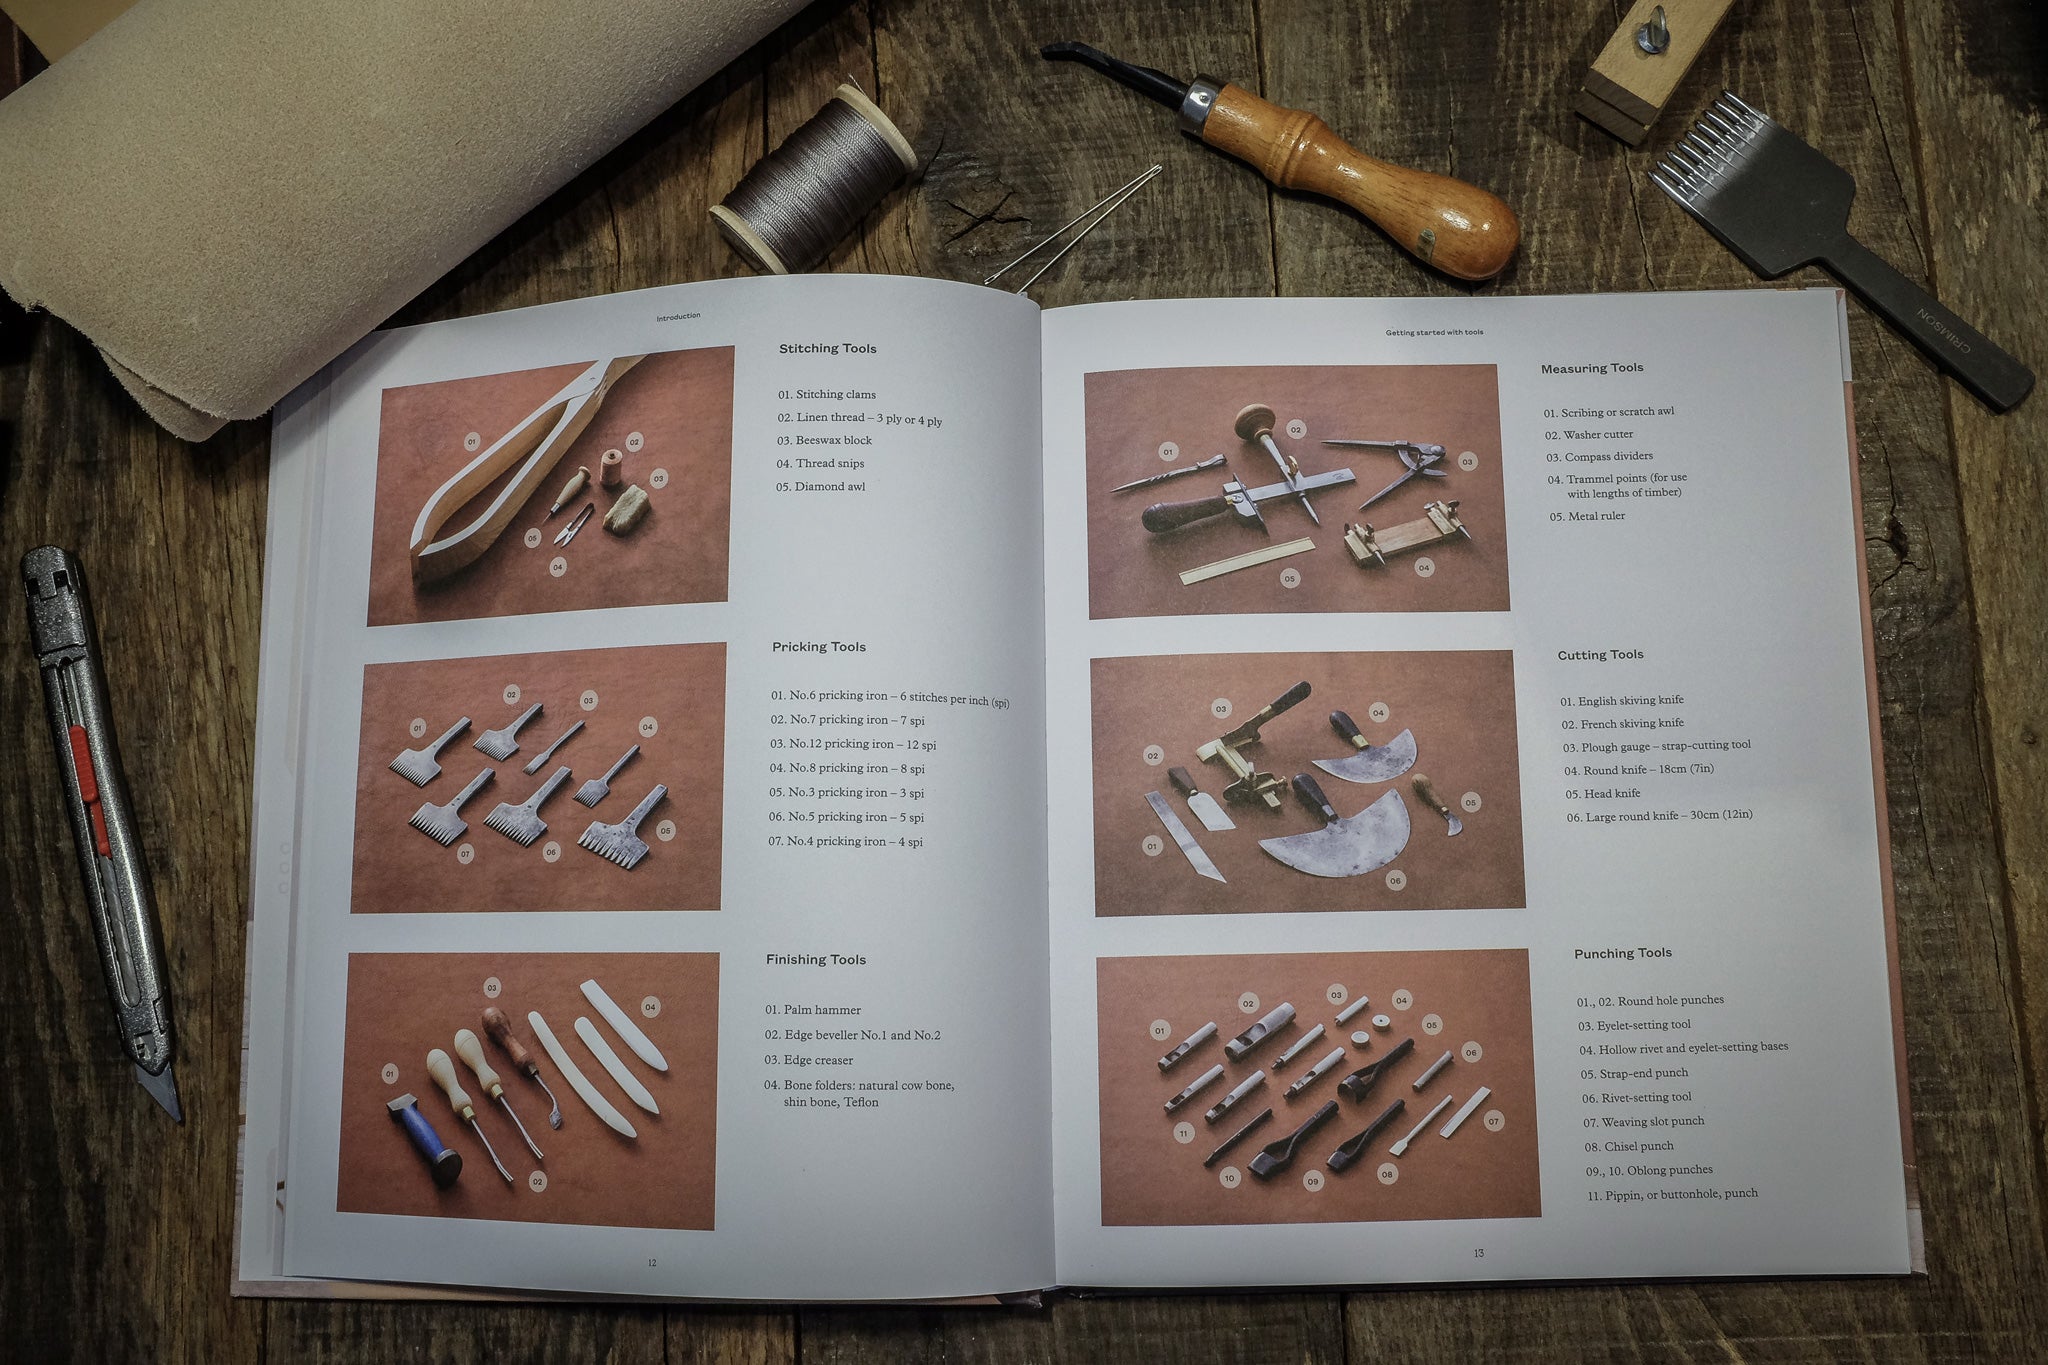 A great overview of all kinds of leather craft tools